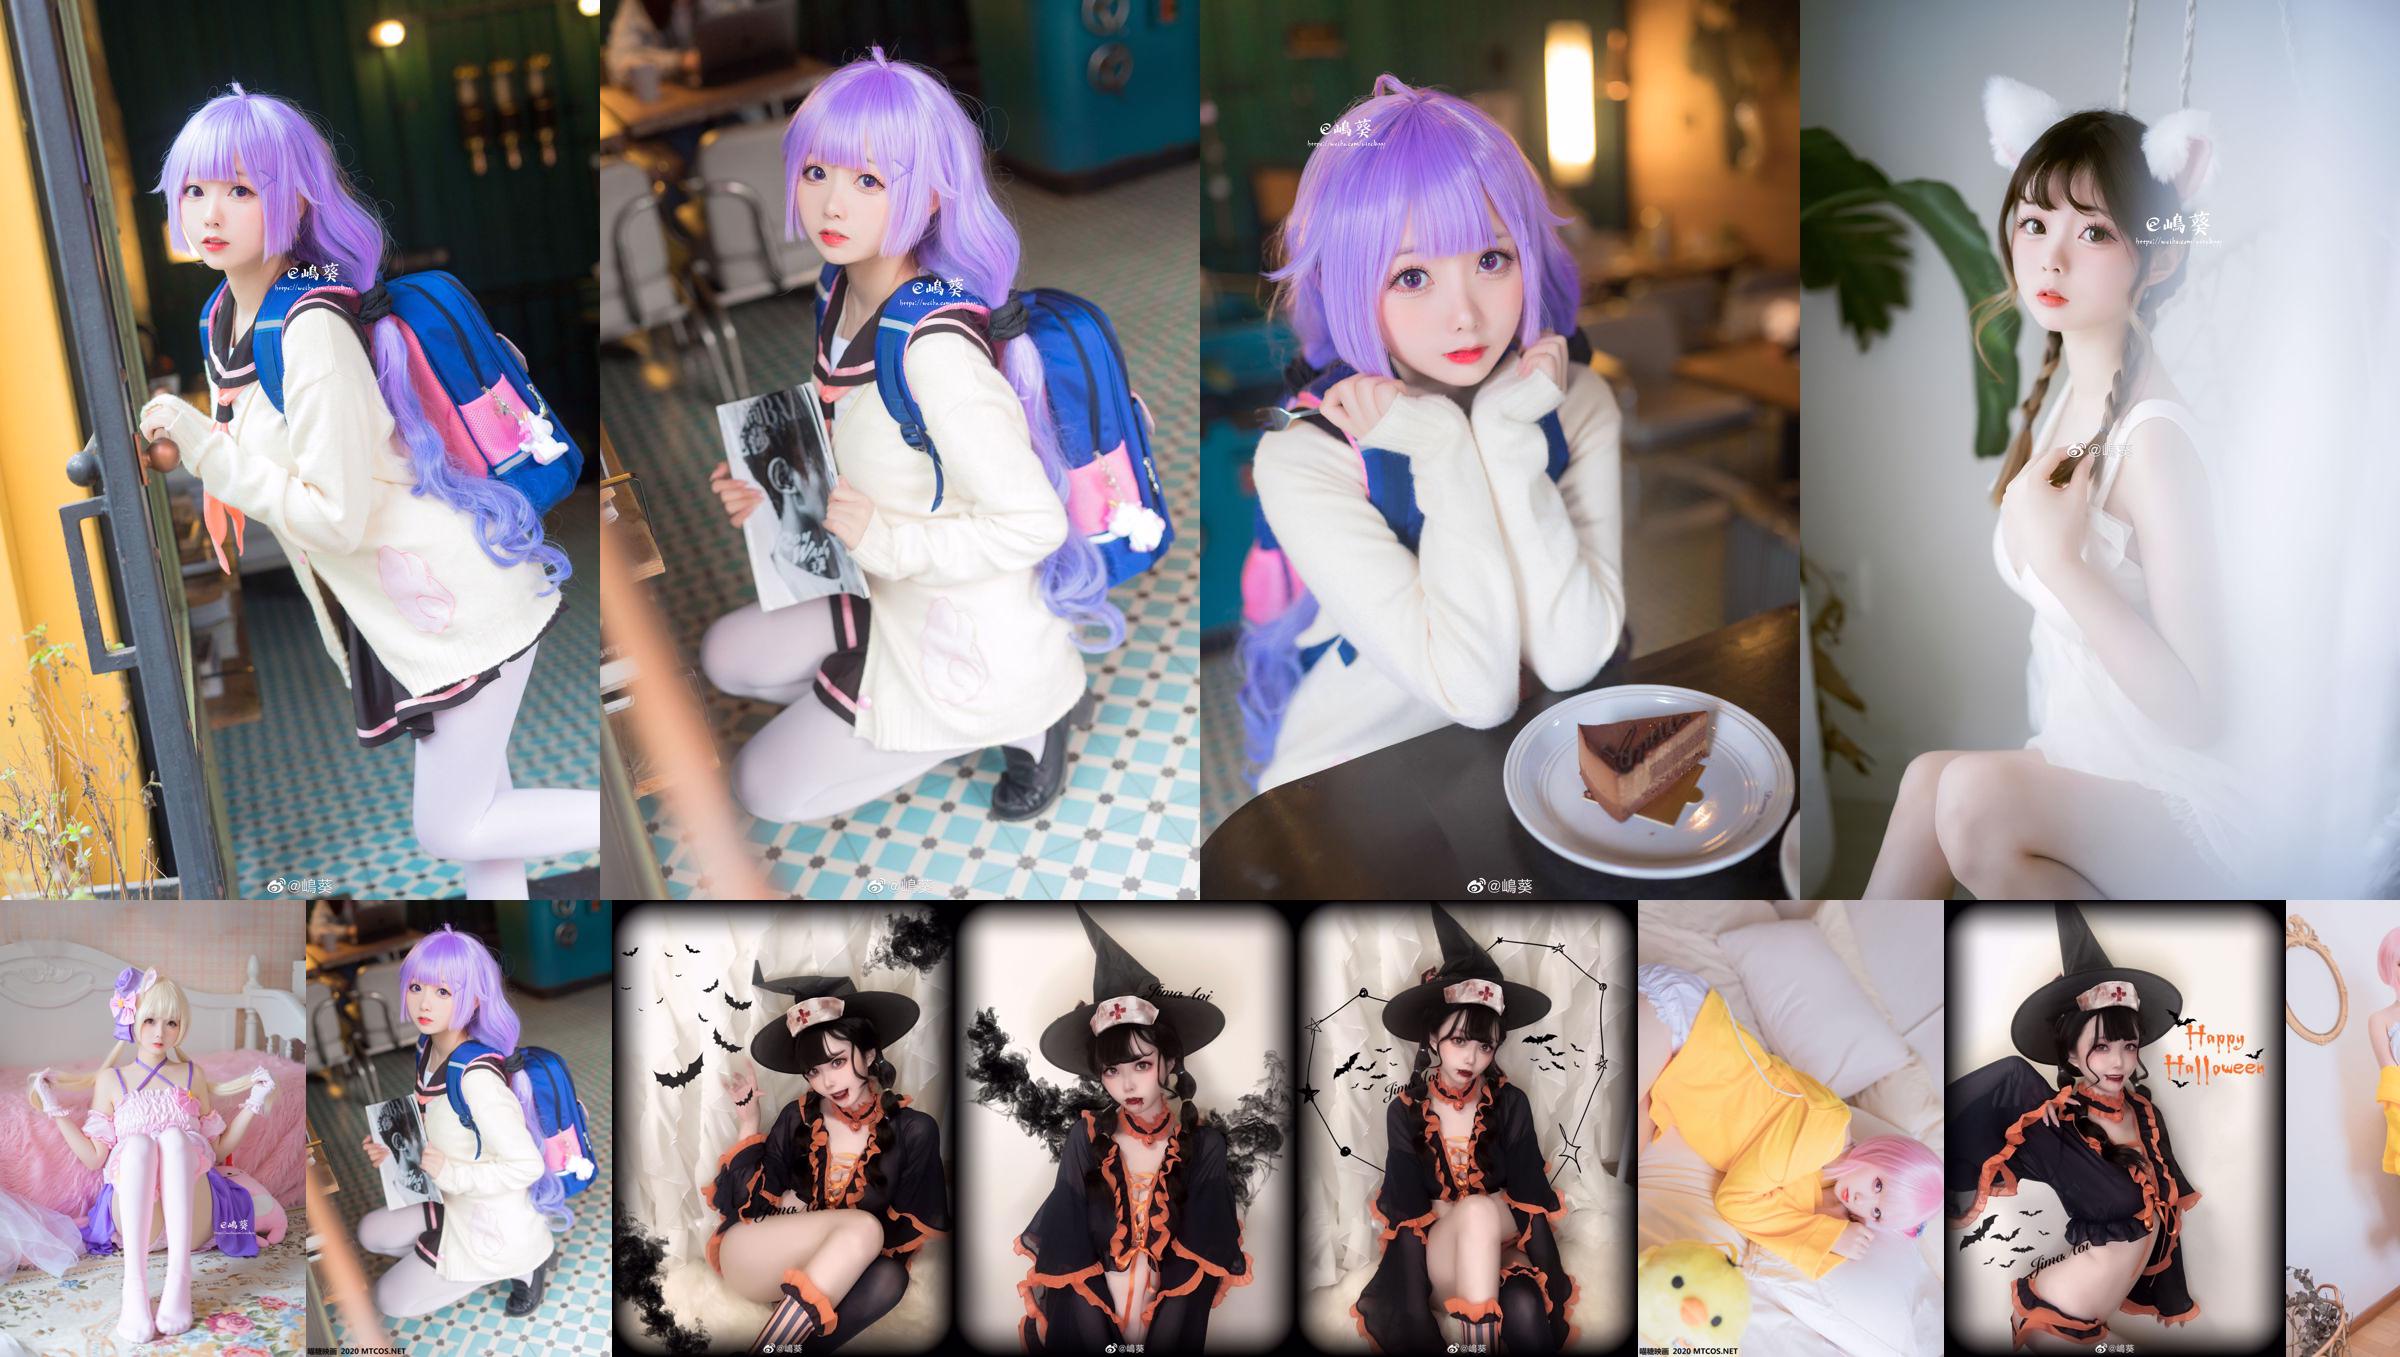 Coser Shima Aoi "Blue Sea Route Unicorn Dating Day" No.56d03d Page 1